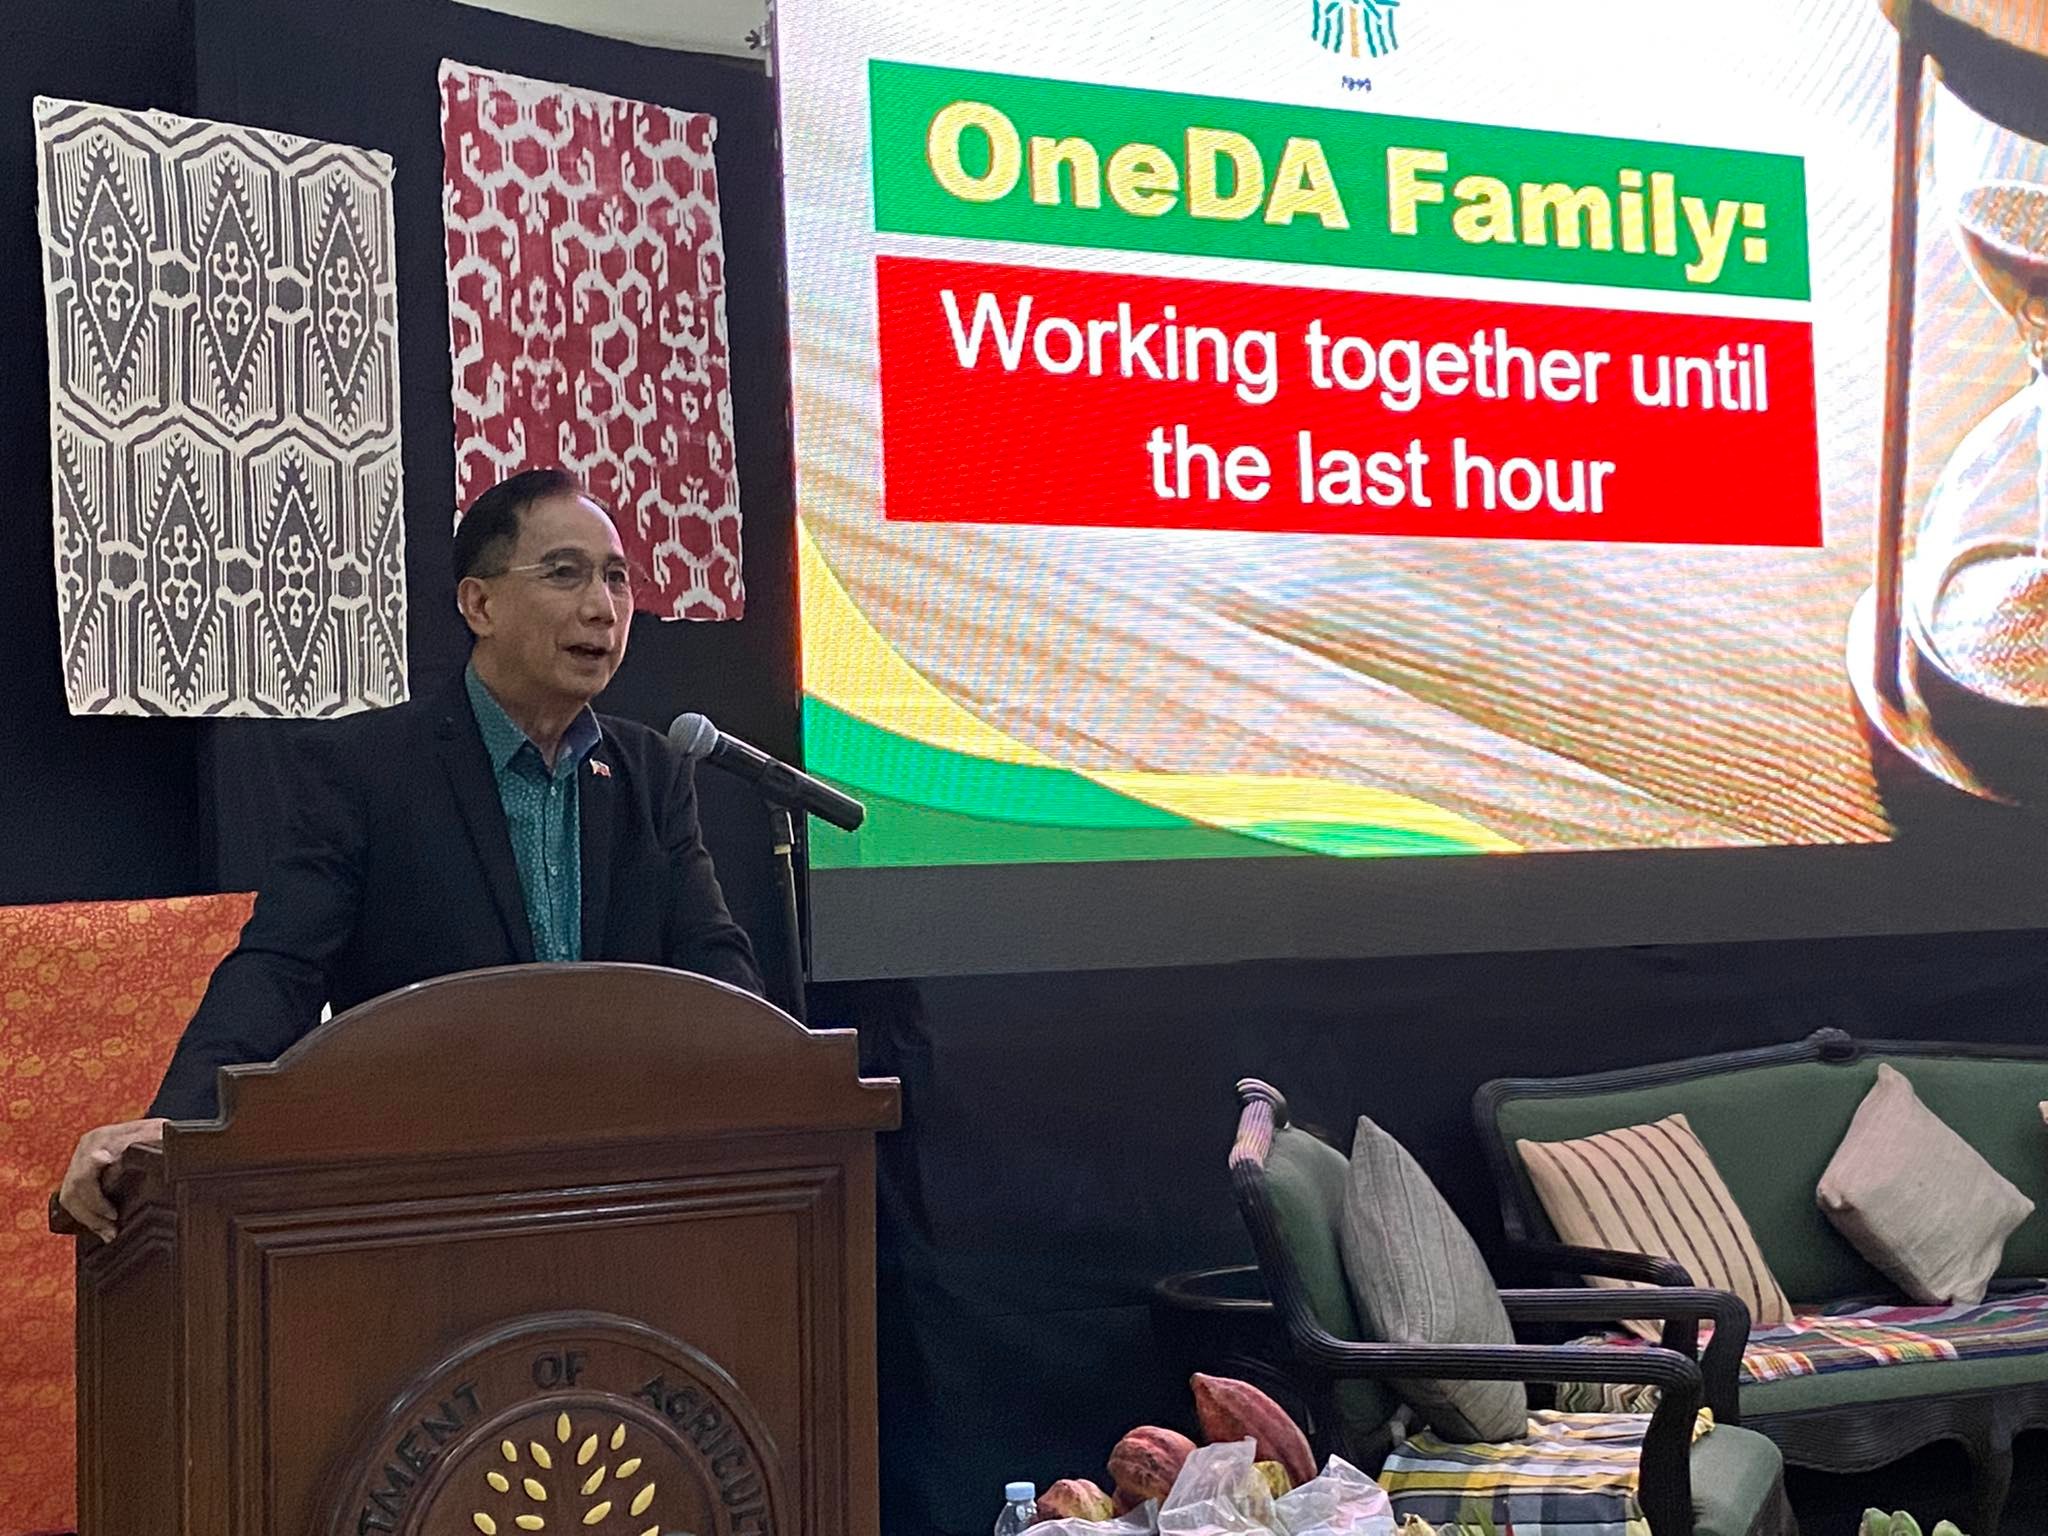 Agri chief asks OneDA family to uphold civil service, work double time